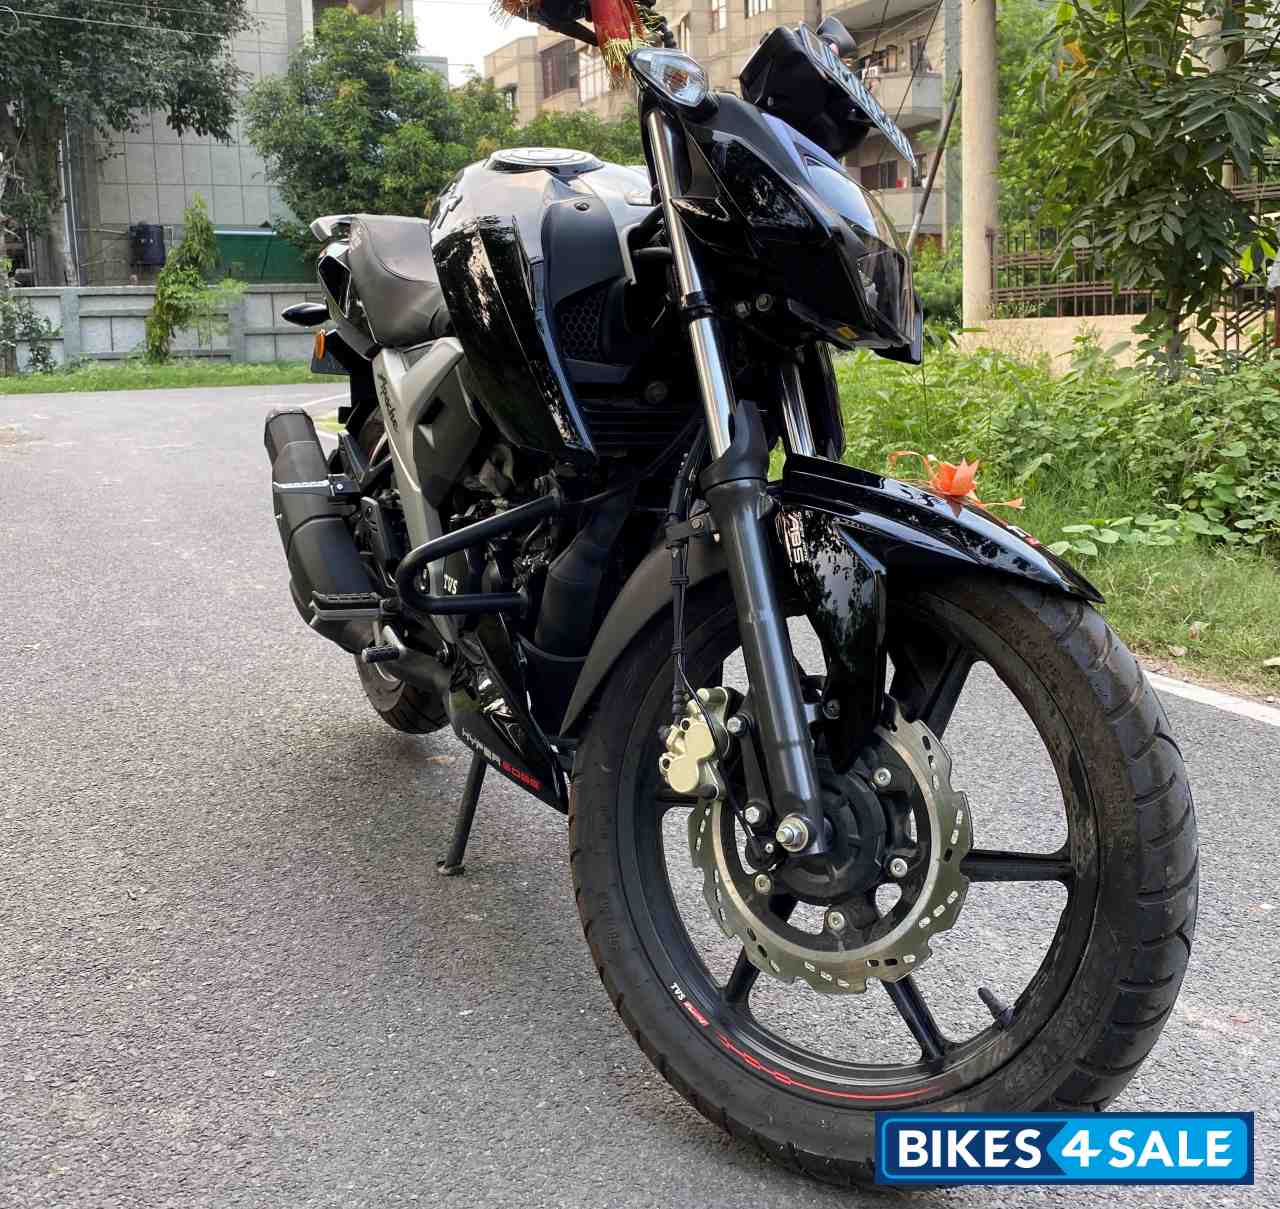 Used Model Tvs Apache Rtr 160 4v Bs6 For Sale In Ghaziabad Id Black Colour Bikes4sale